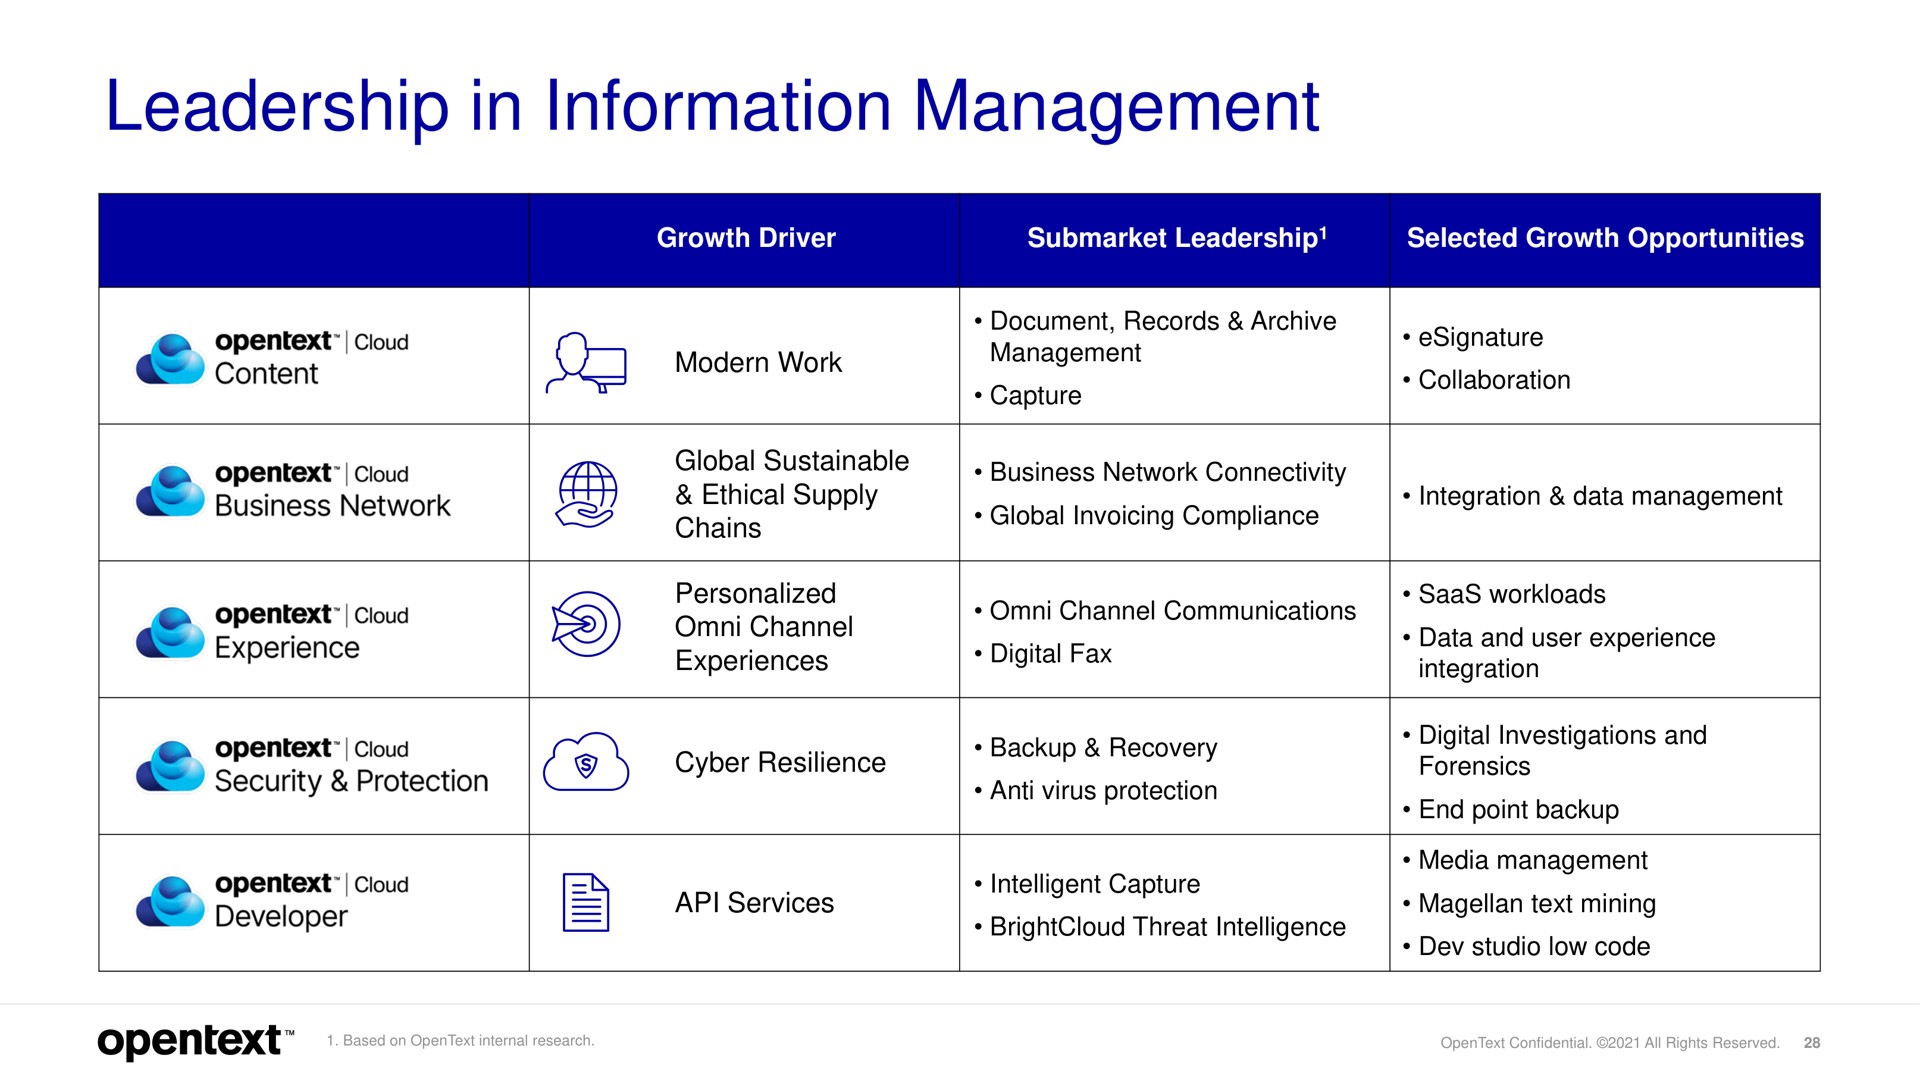 leadership in information management | OpenText